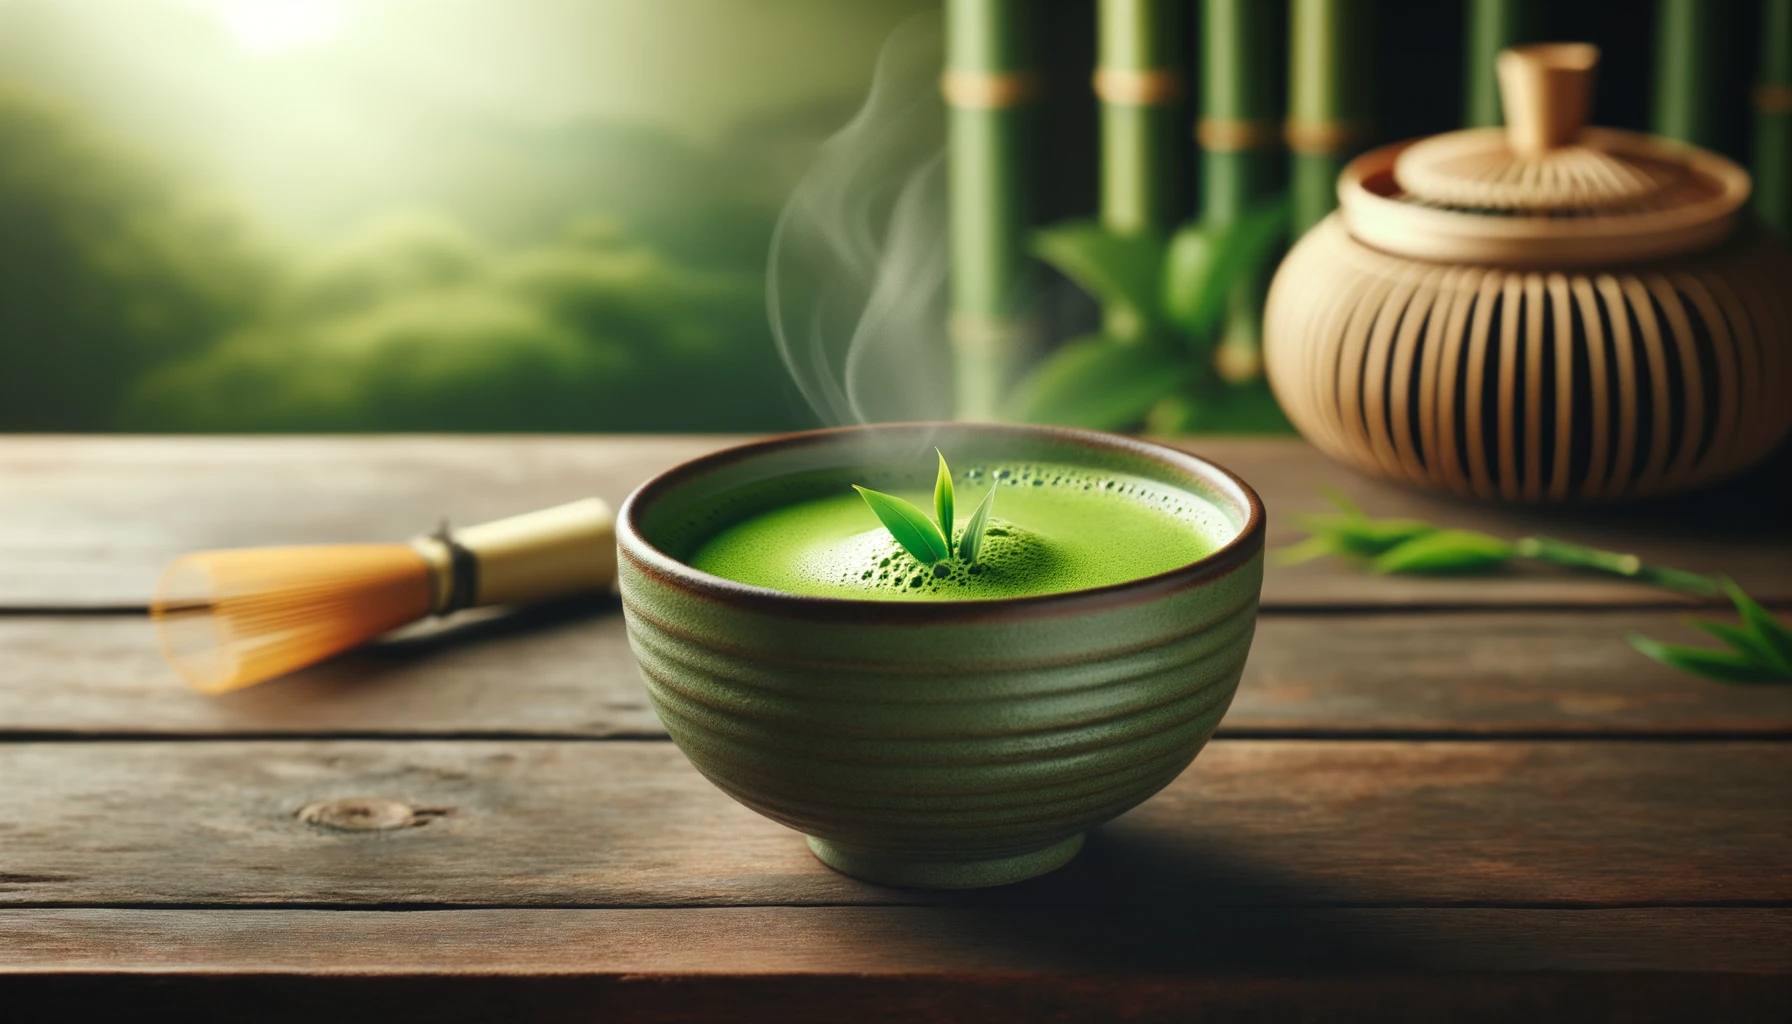 Bowl of bright green matcha tea with steam rising, set against a serene Japanese-inspired backdrop.